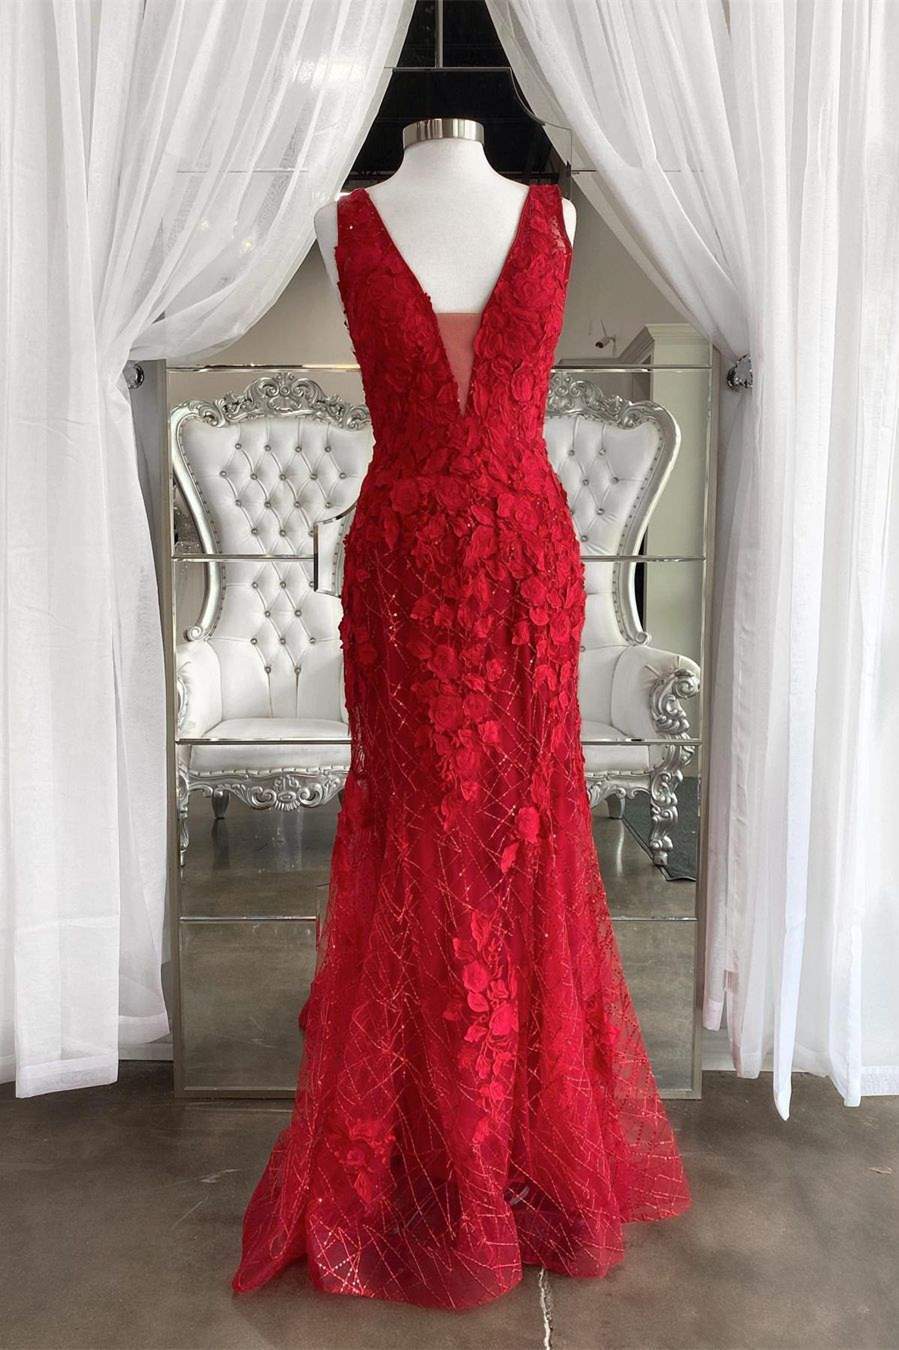 Plumgiong V-Neck Red Long Prom Dress with Appliques,DS0249